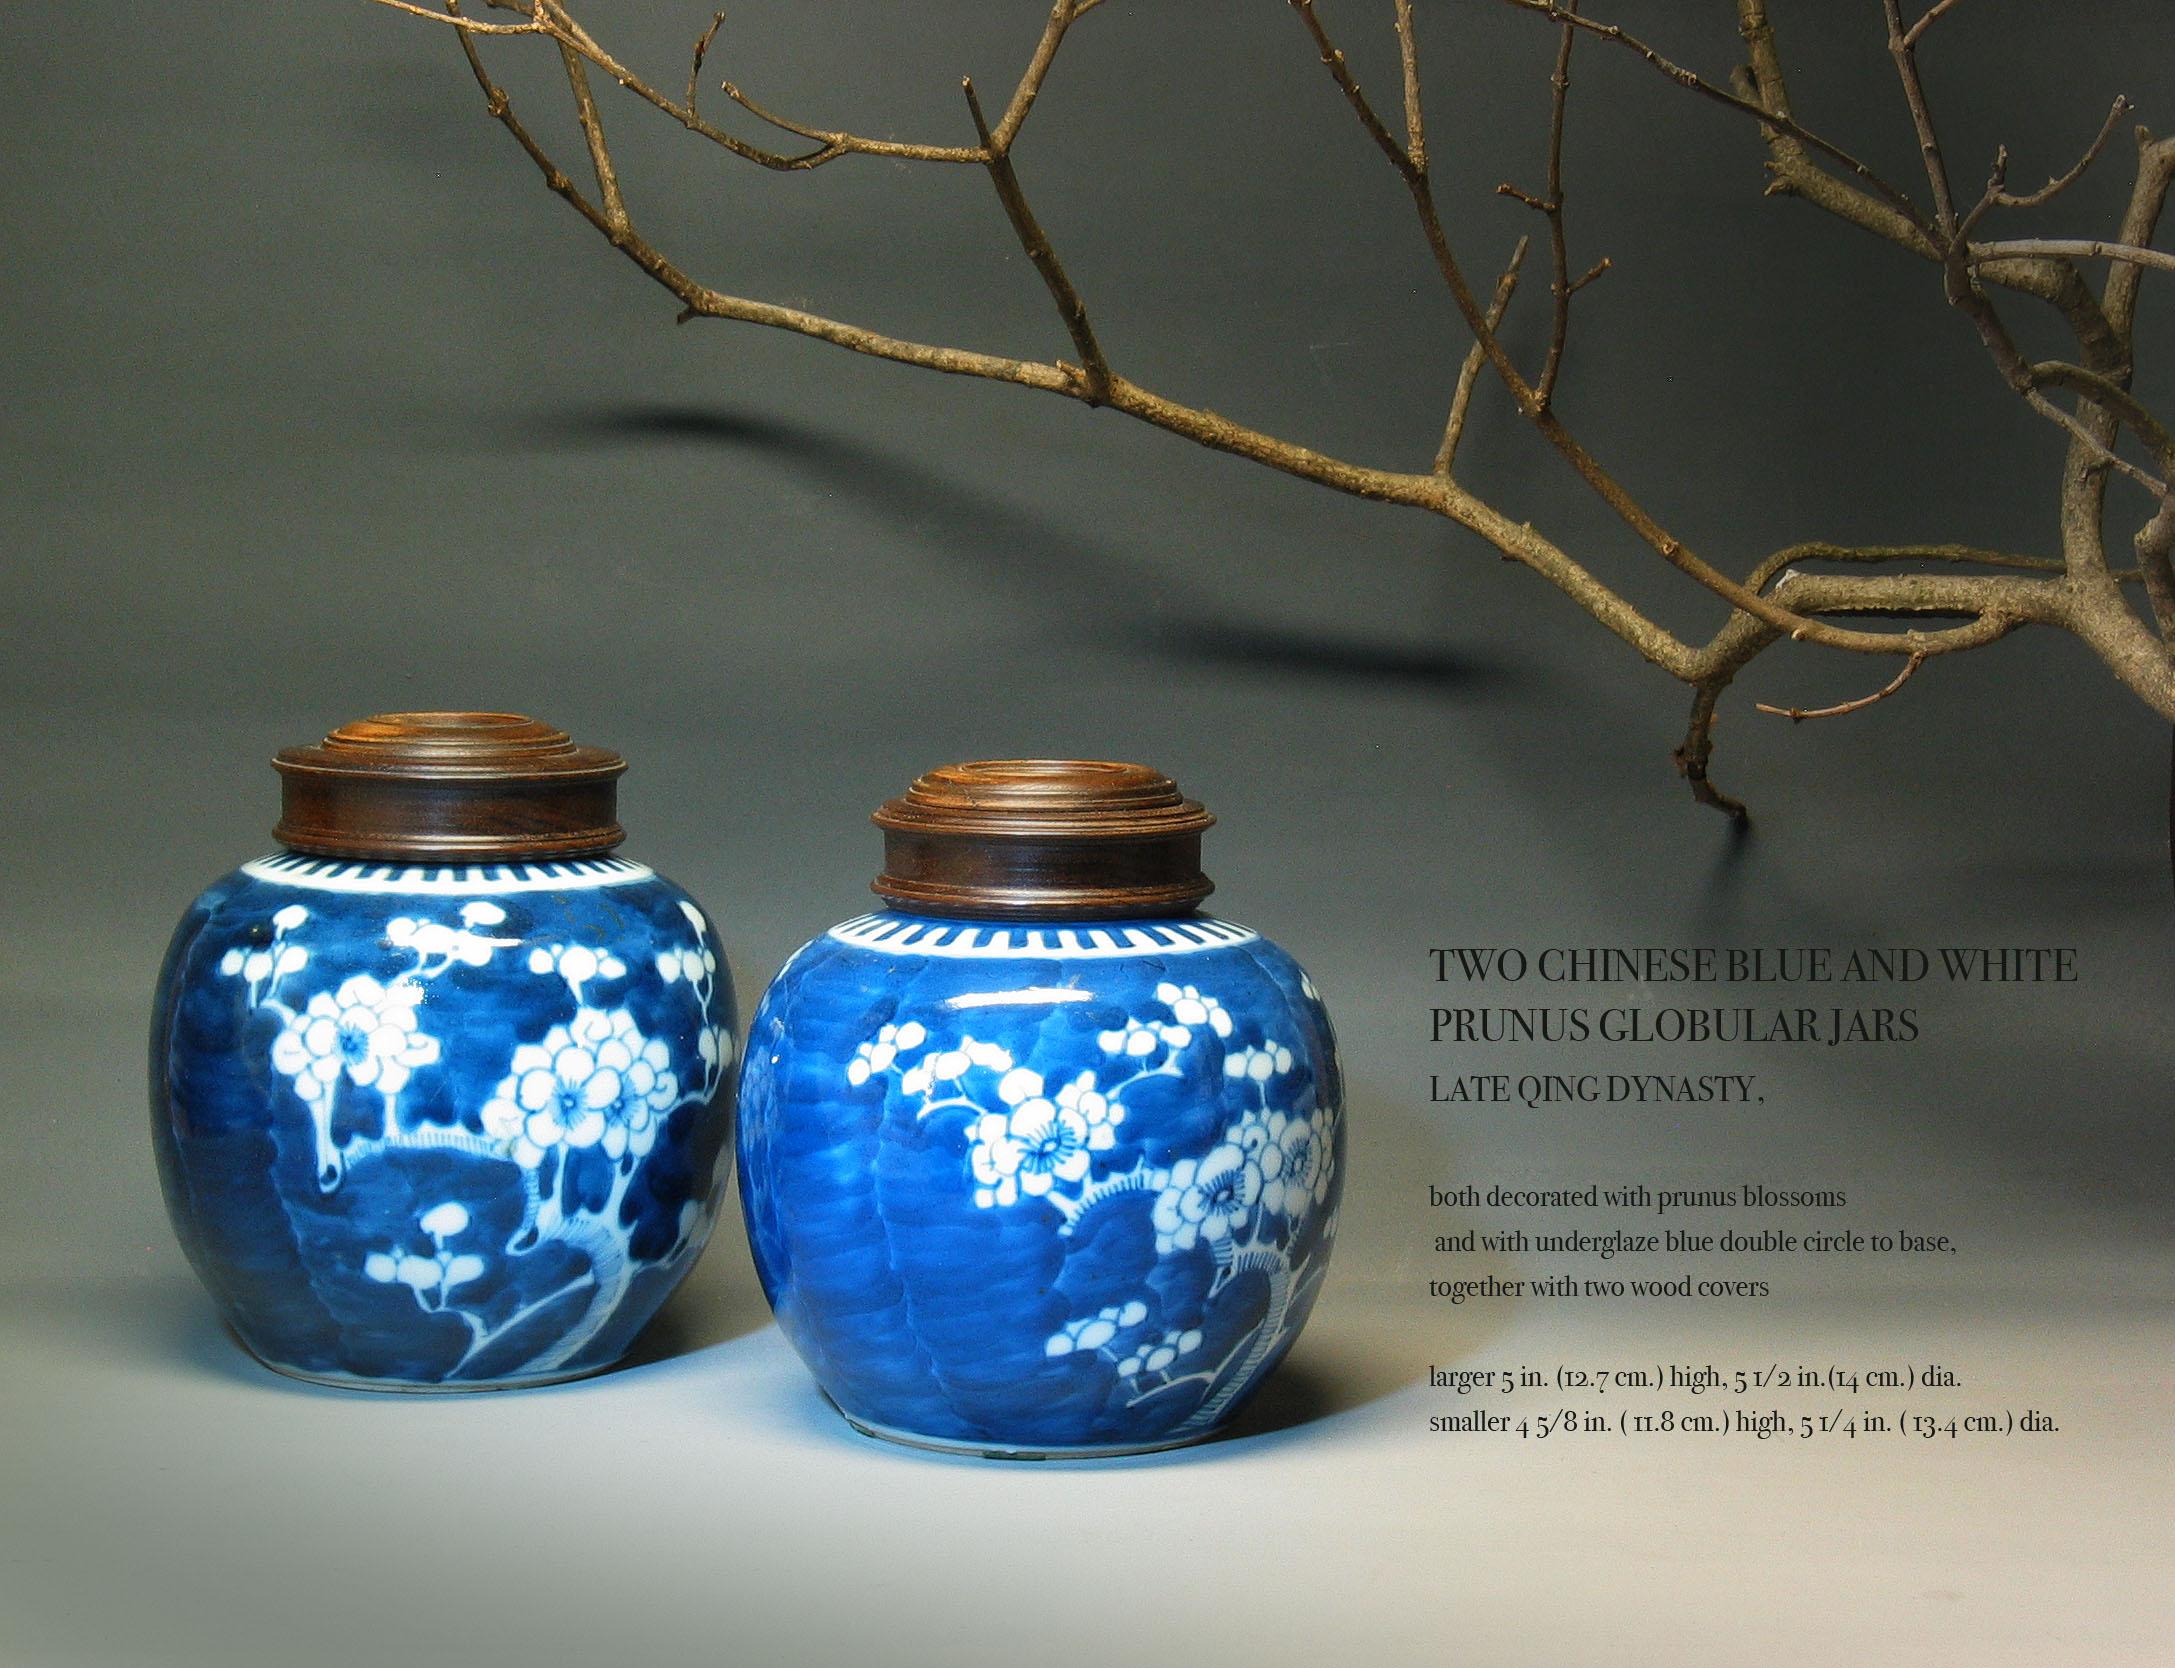 Two Chinese Blue and White Prunus Globular Jars Late Qing Dynasty 2